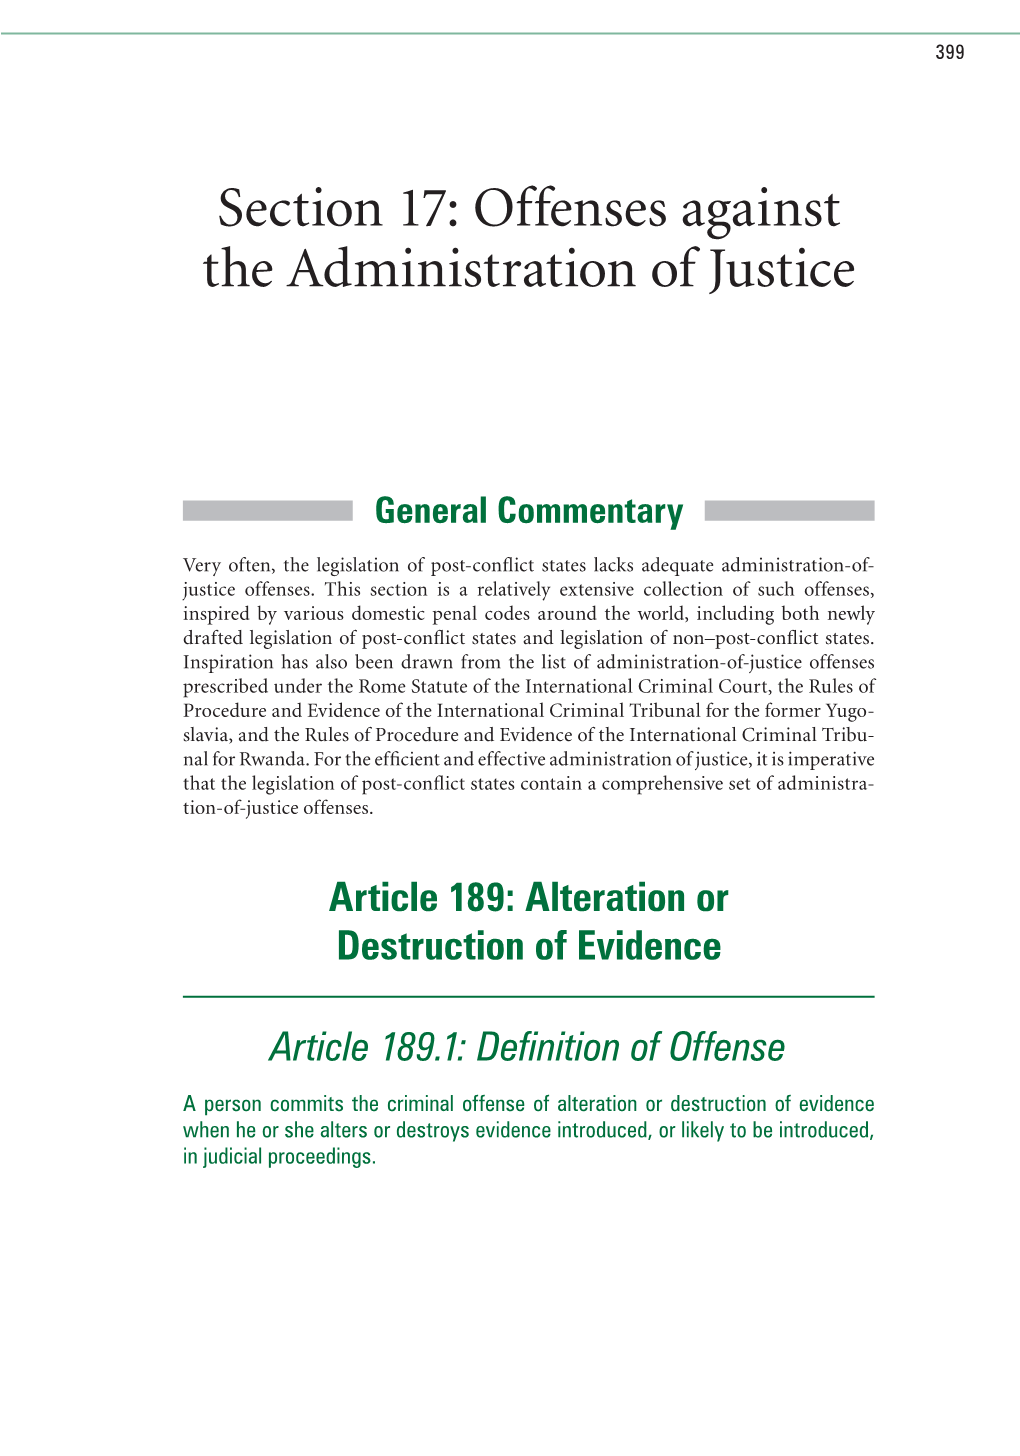 Section 17: Offenses Against the Administration of Justice